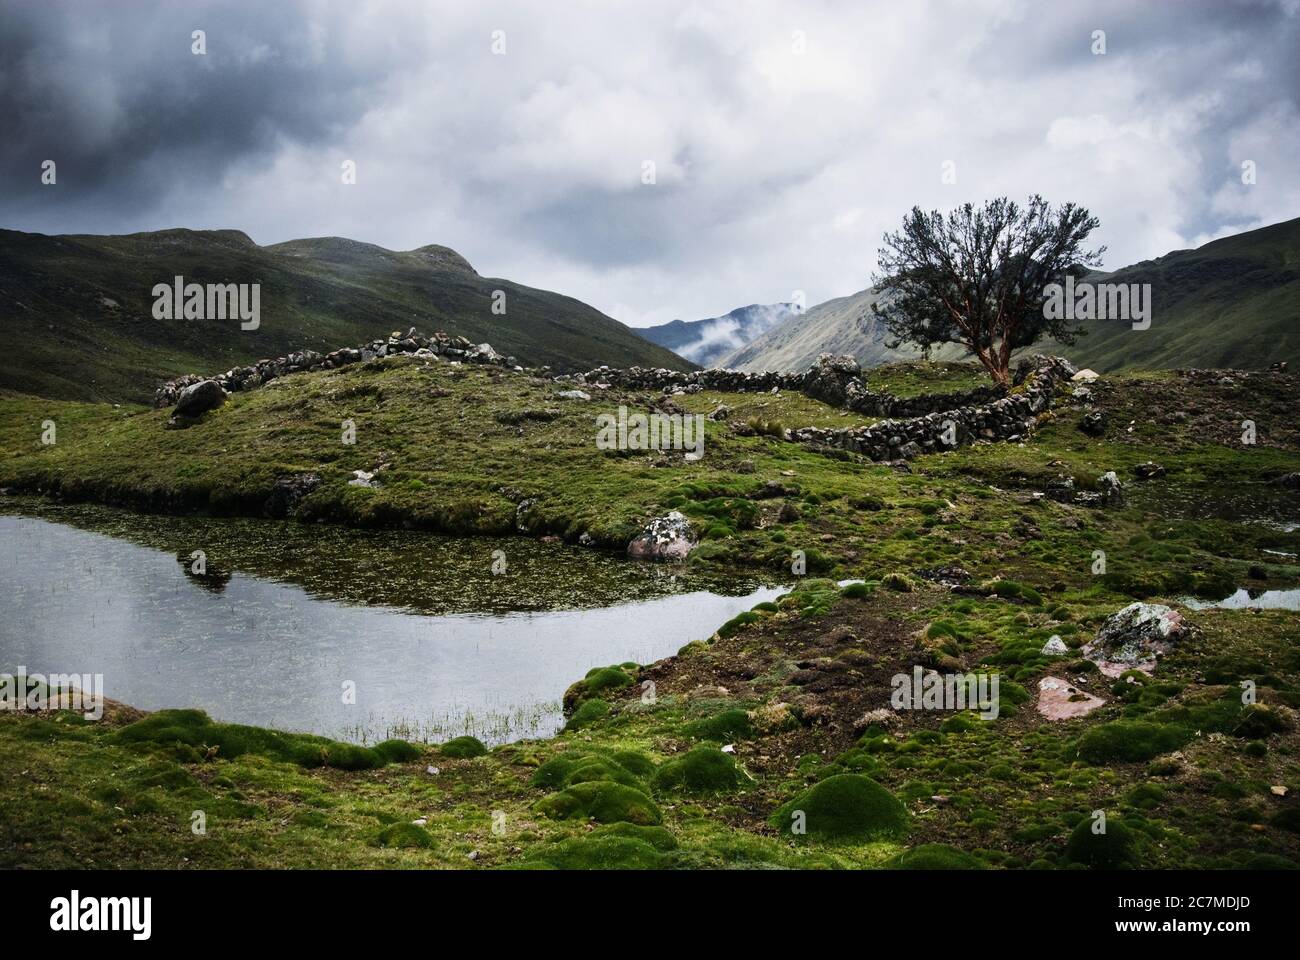 Landscape of Chaullacocha village, Andes Mountains, Peru, South America Stock Photo